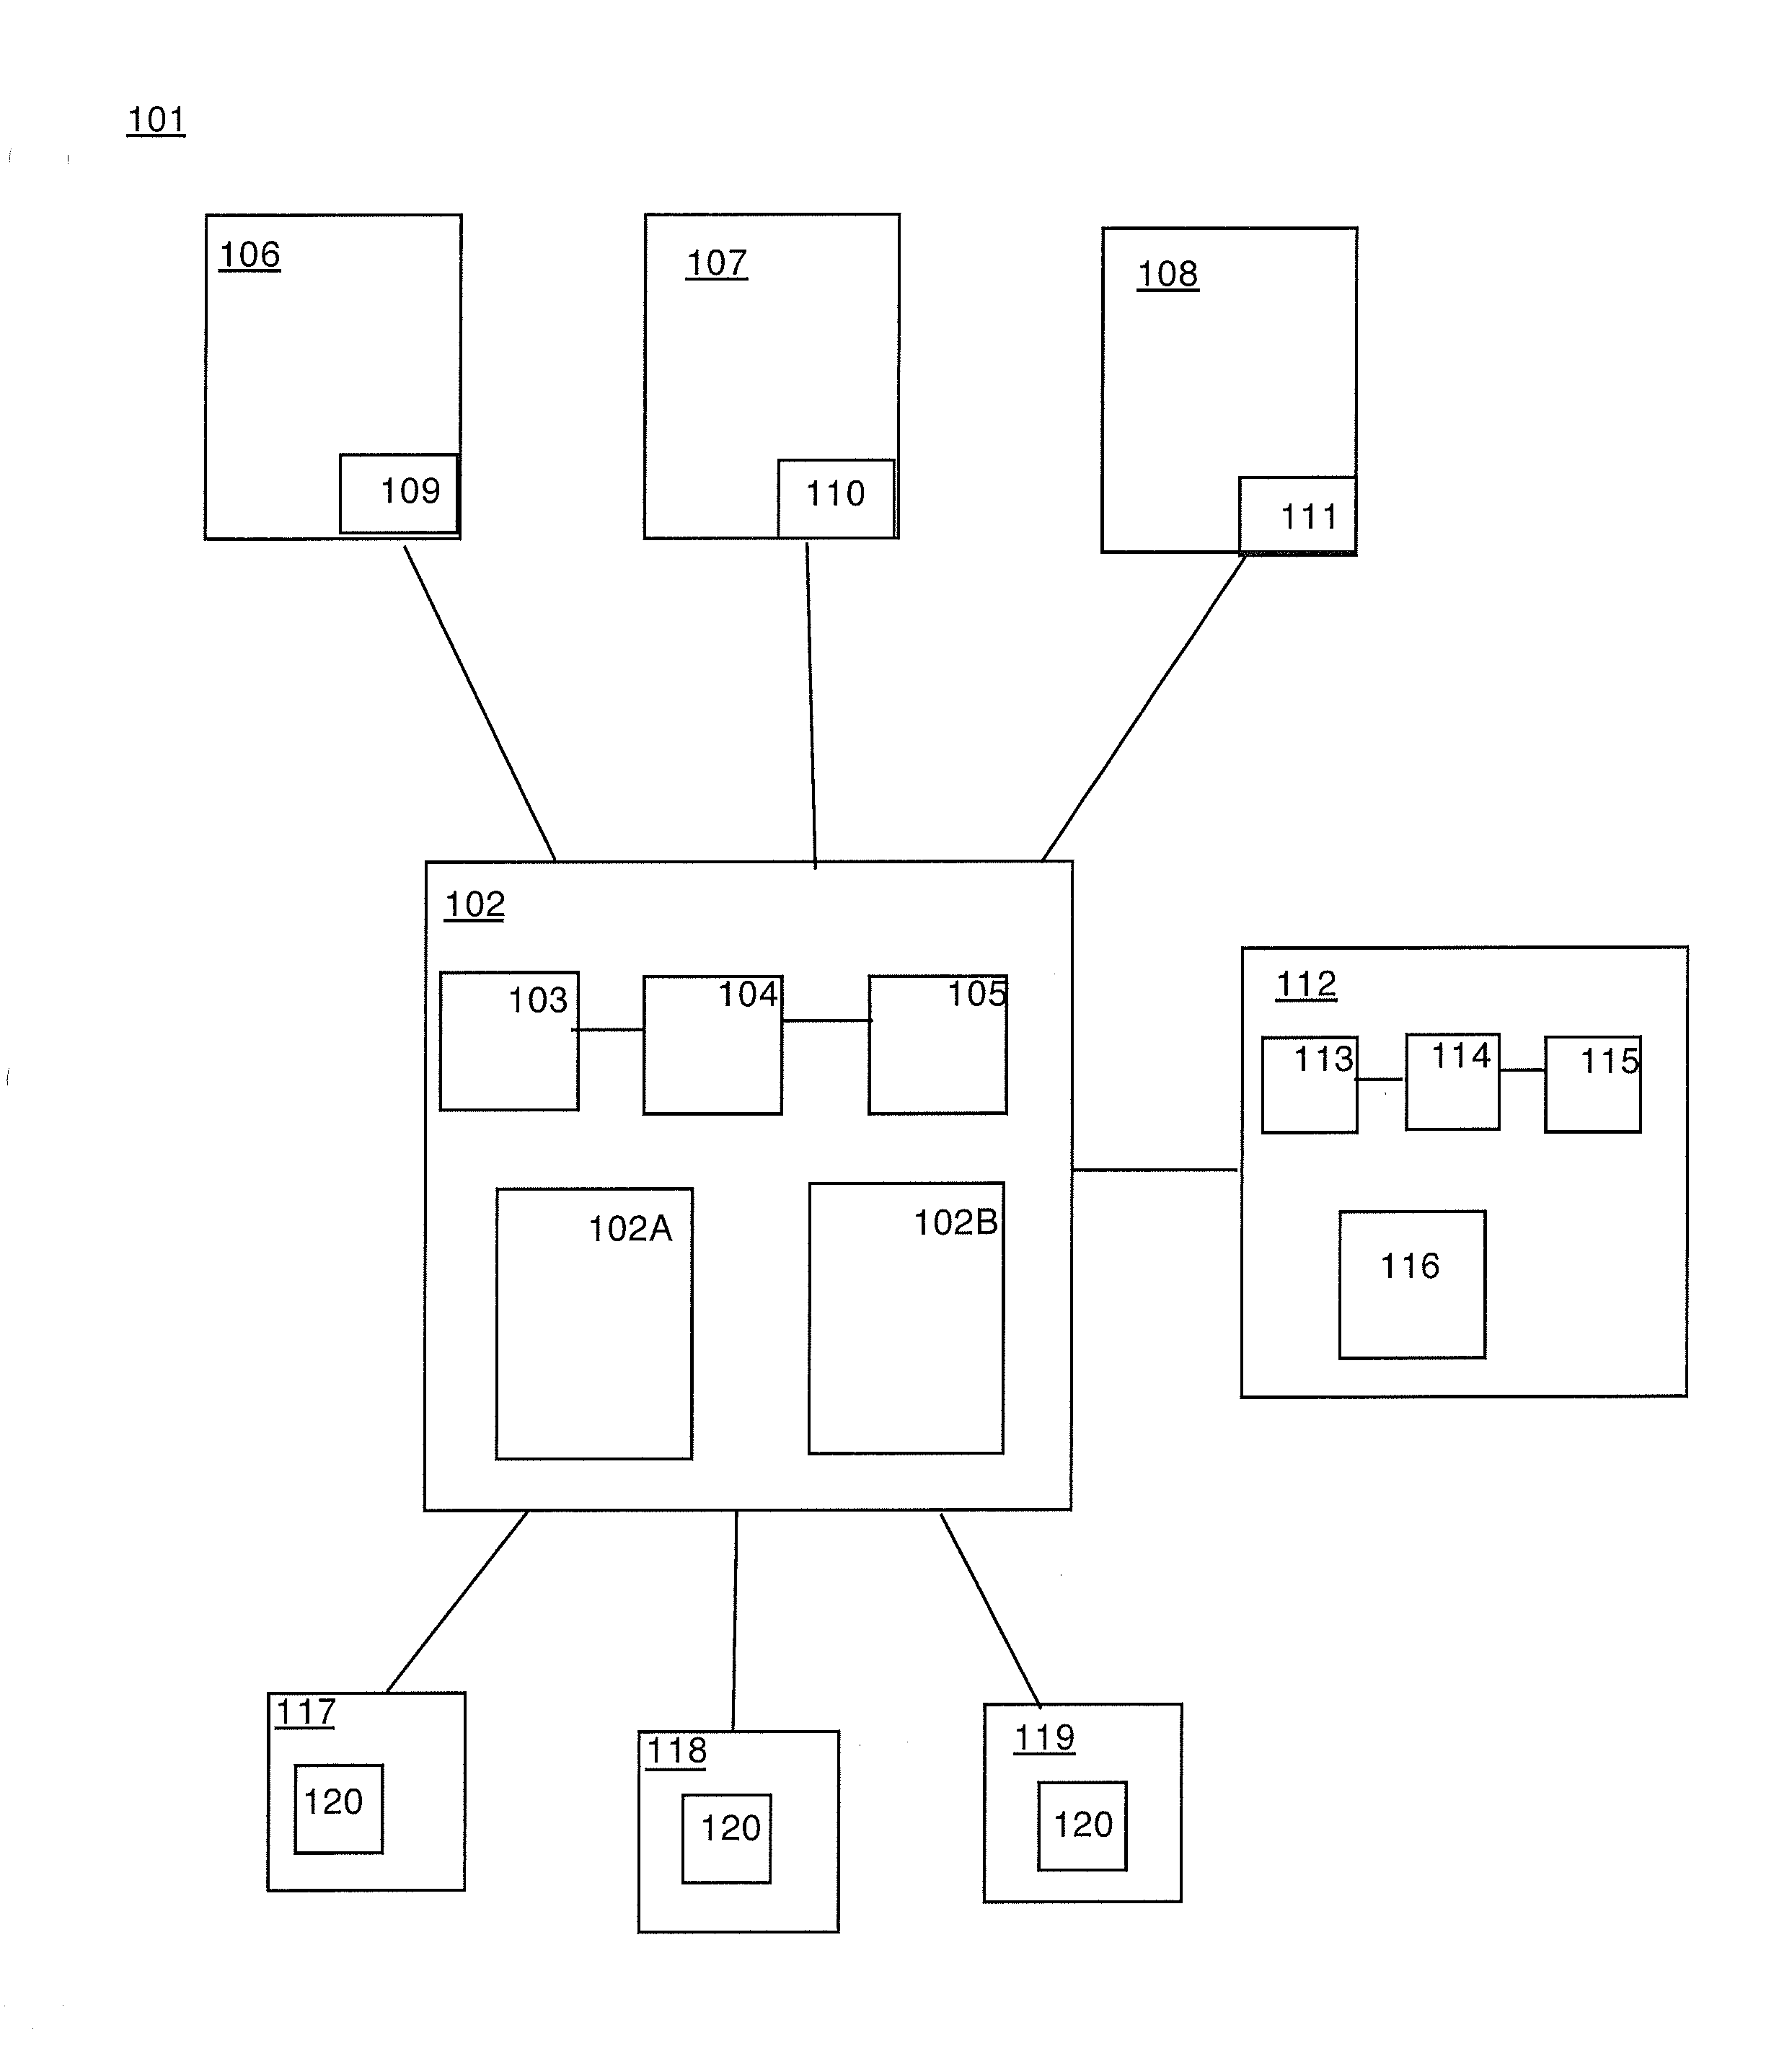 Method and Apparatus for Translating and Locating Services in Multiple Languages